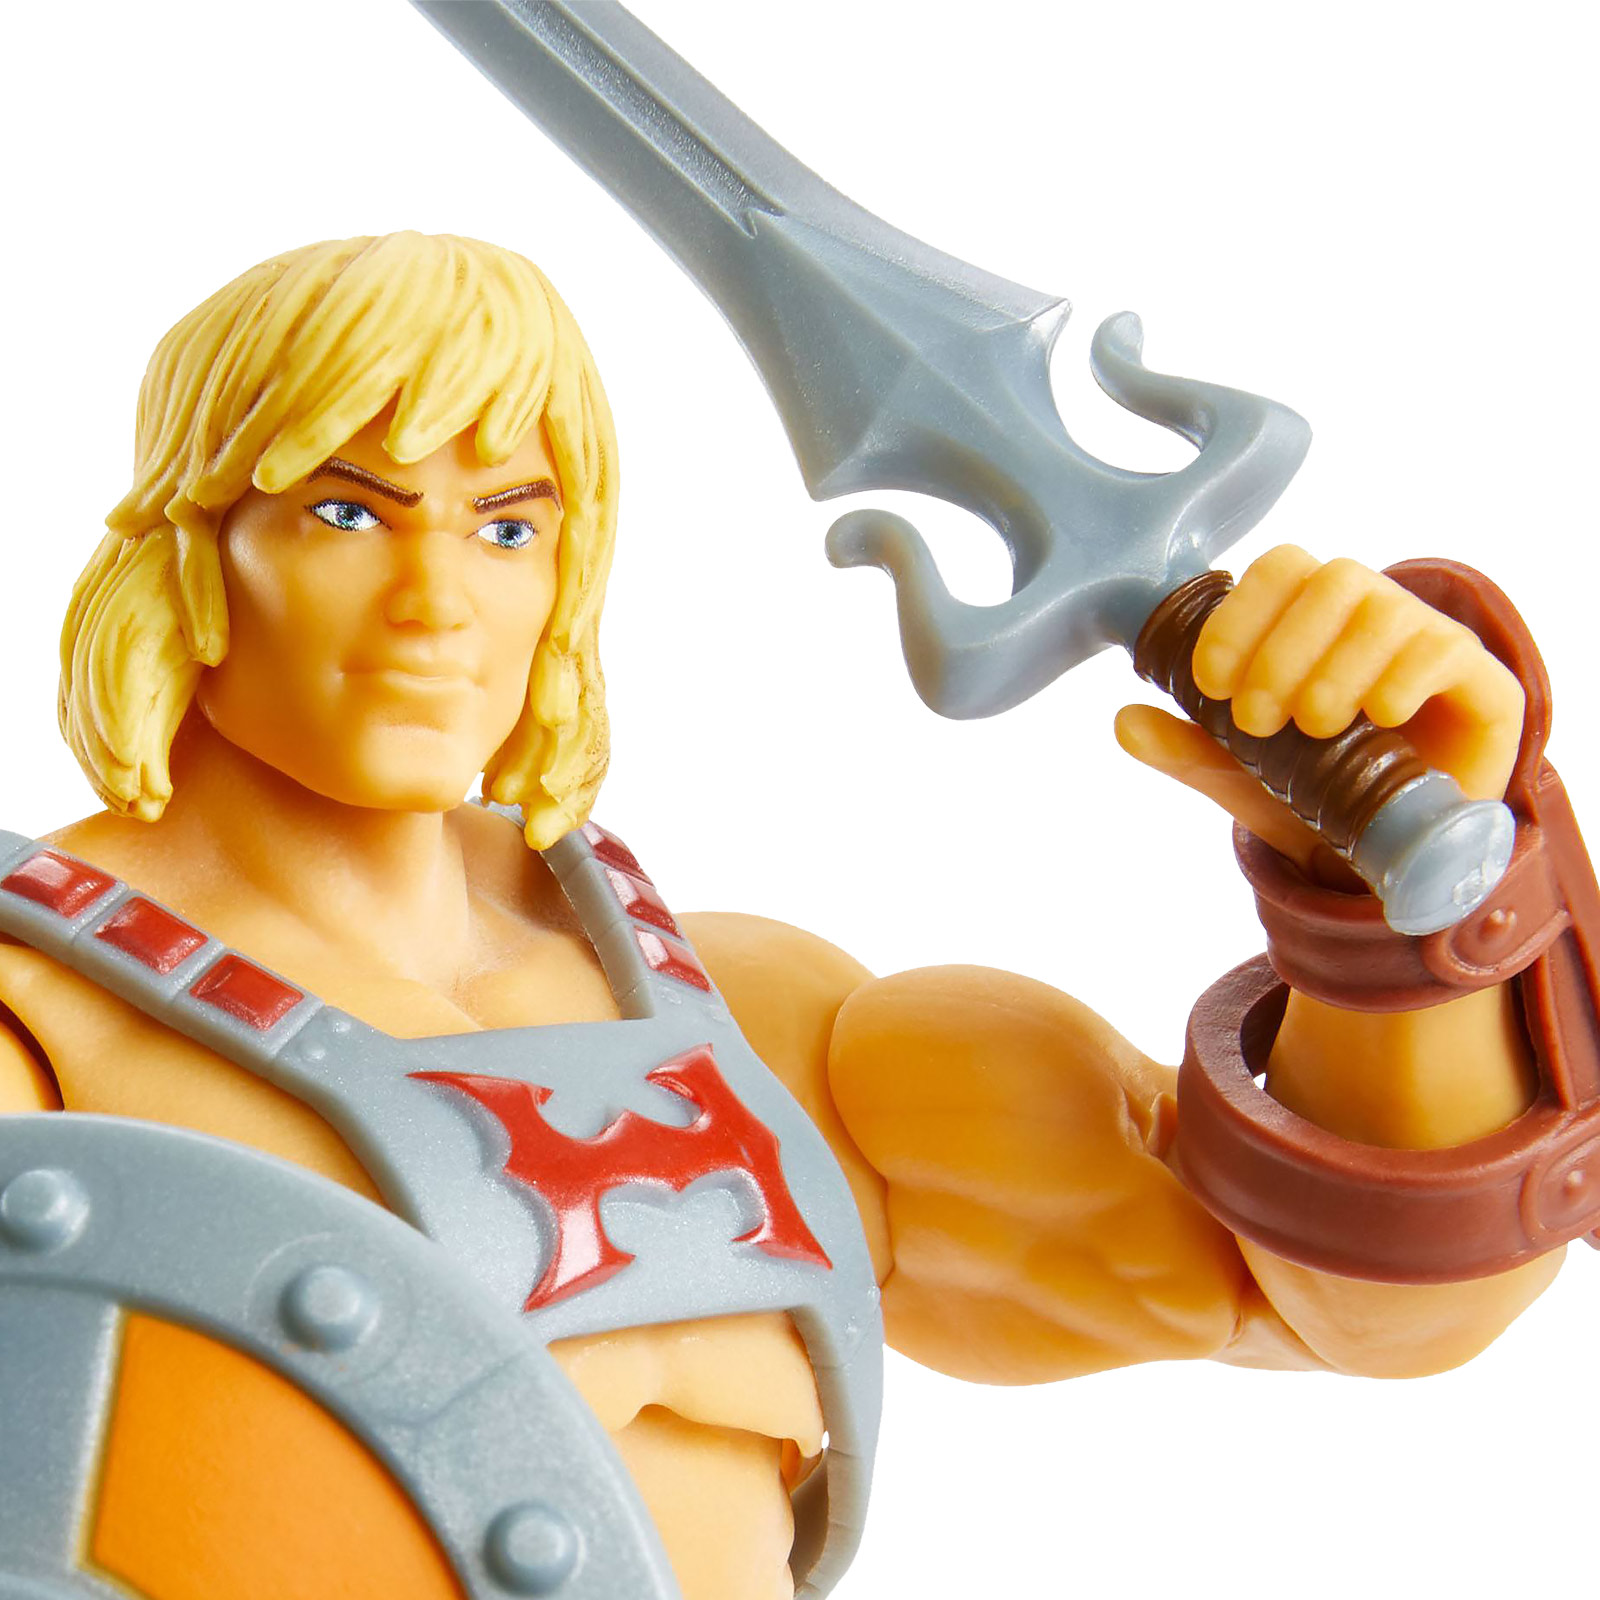 Masters of the Universe - He-Man Action Figure